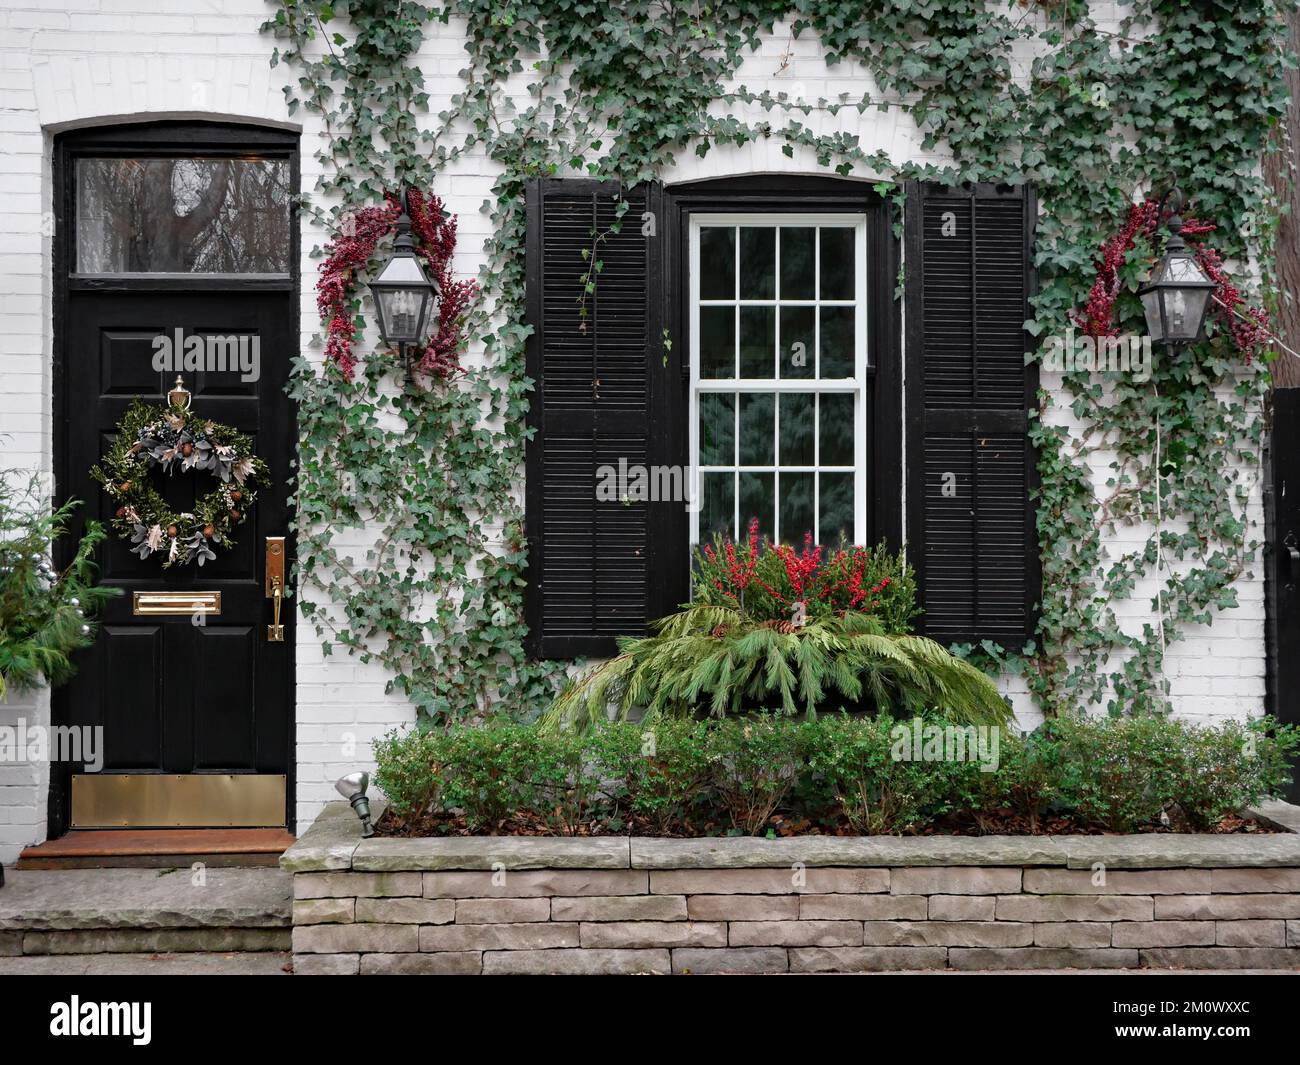 Front of old brick house with Christmas wreath on front door and holly berry decorations Stock Photo